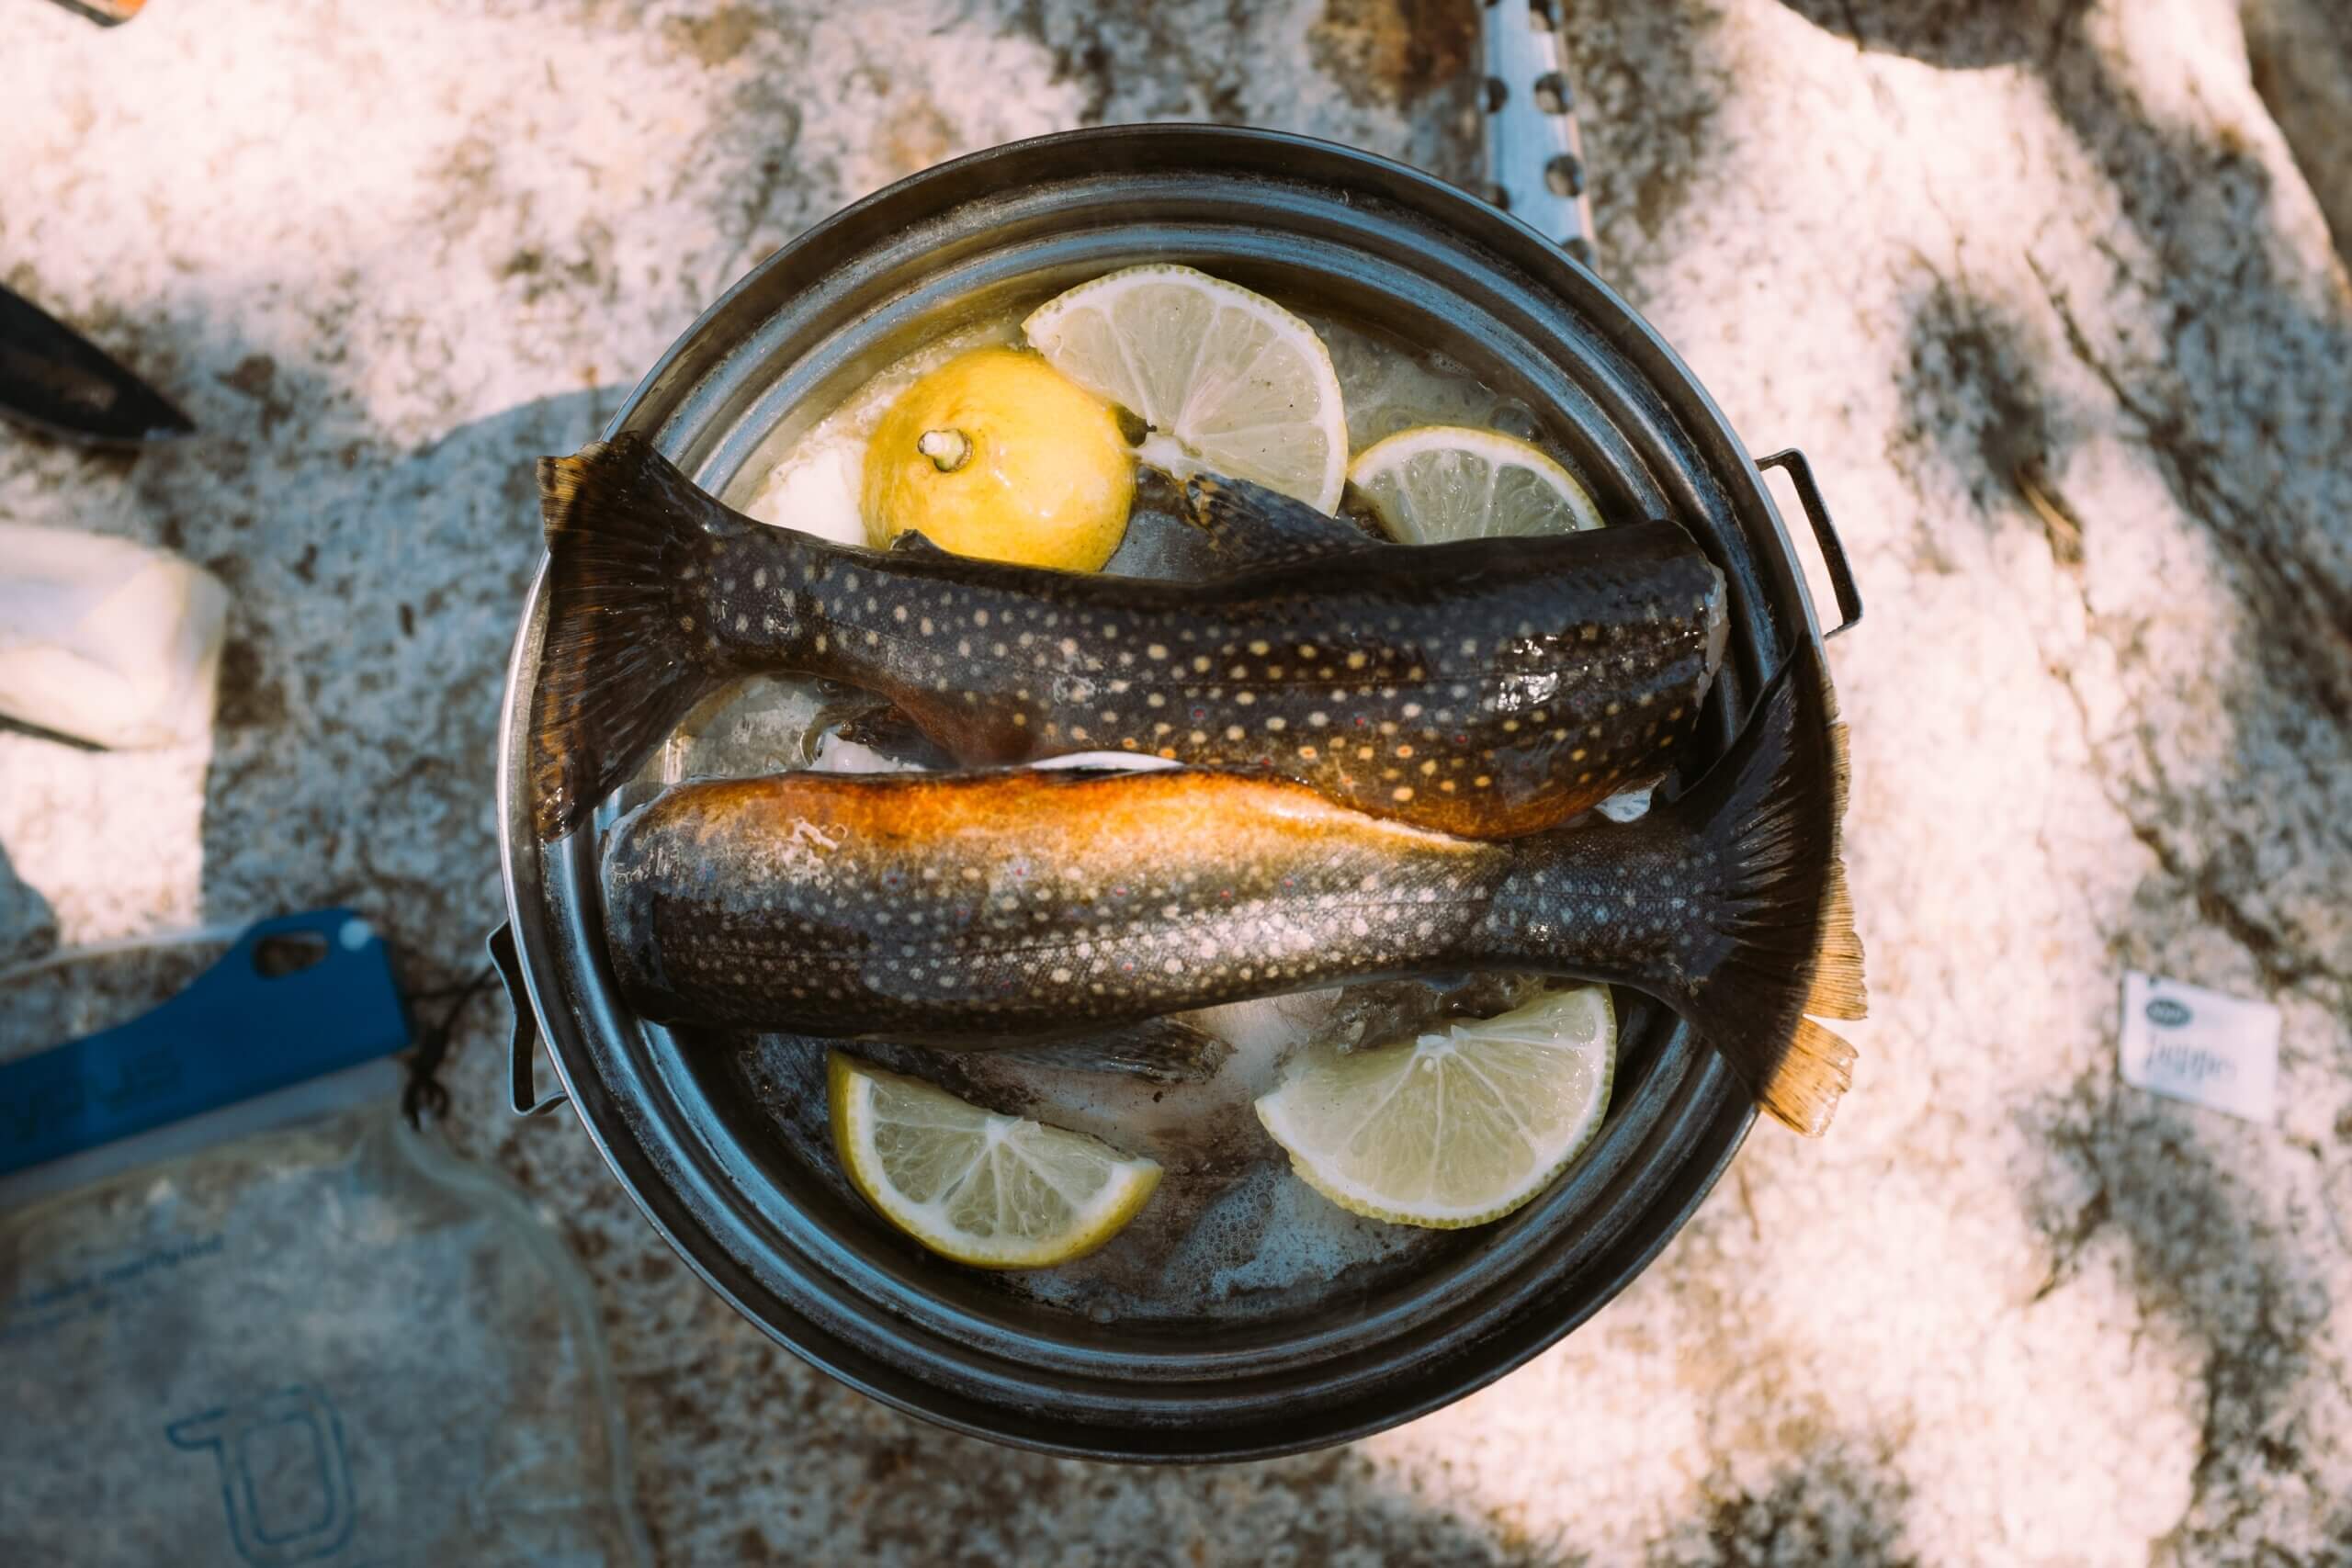 How to Prepare and Cook Your Trout Catch